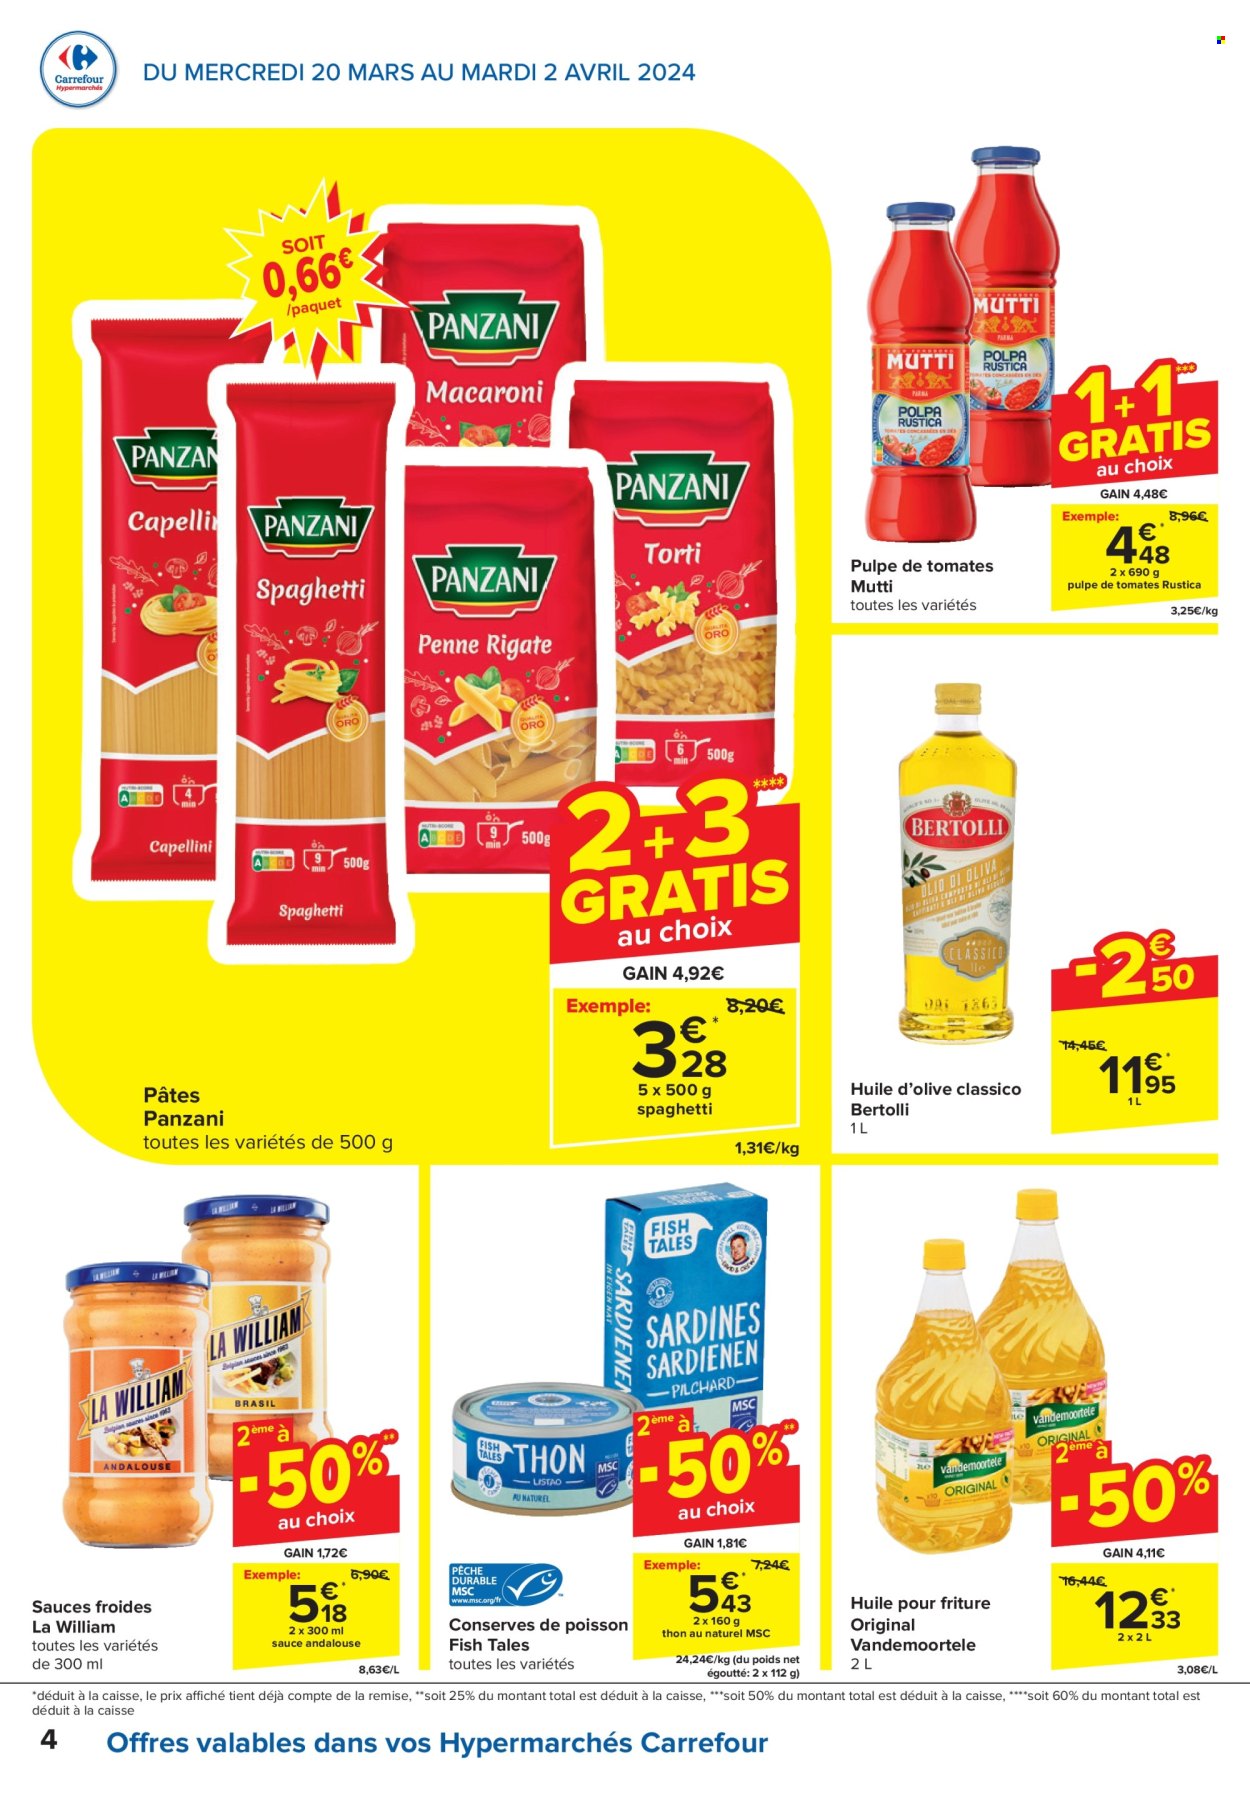 Catalogue Carrefour hypermarkt - 20.3.2024 - 2.4.2024. Page 4.